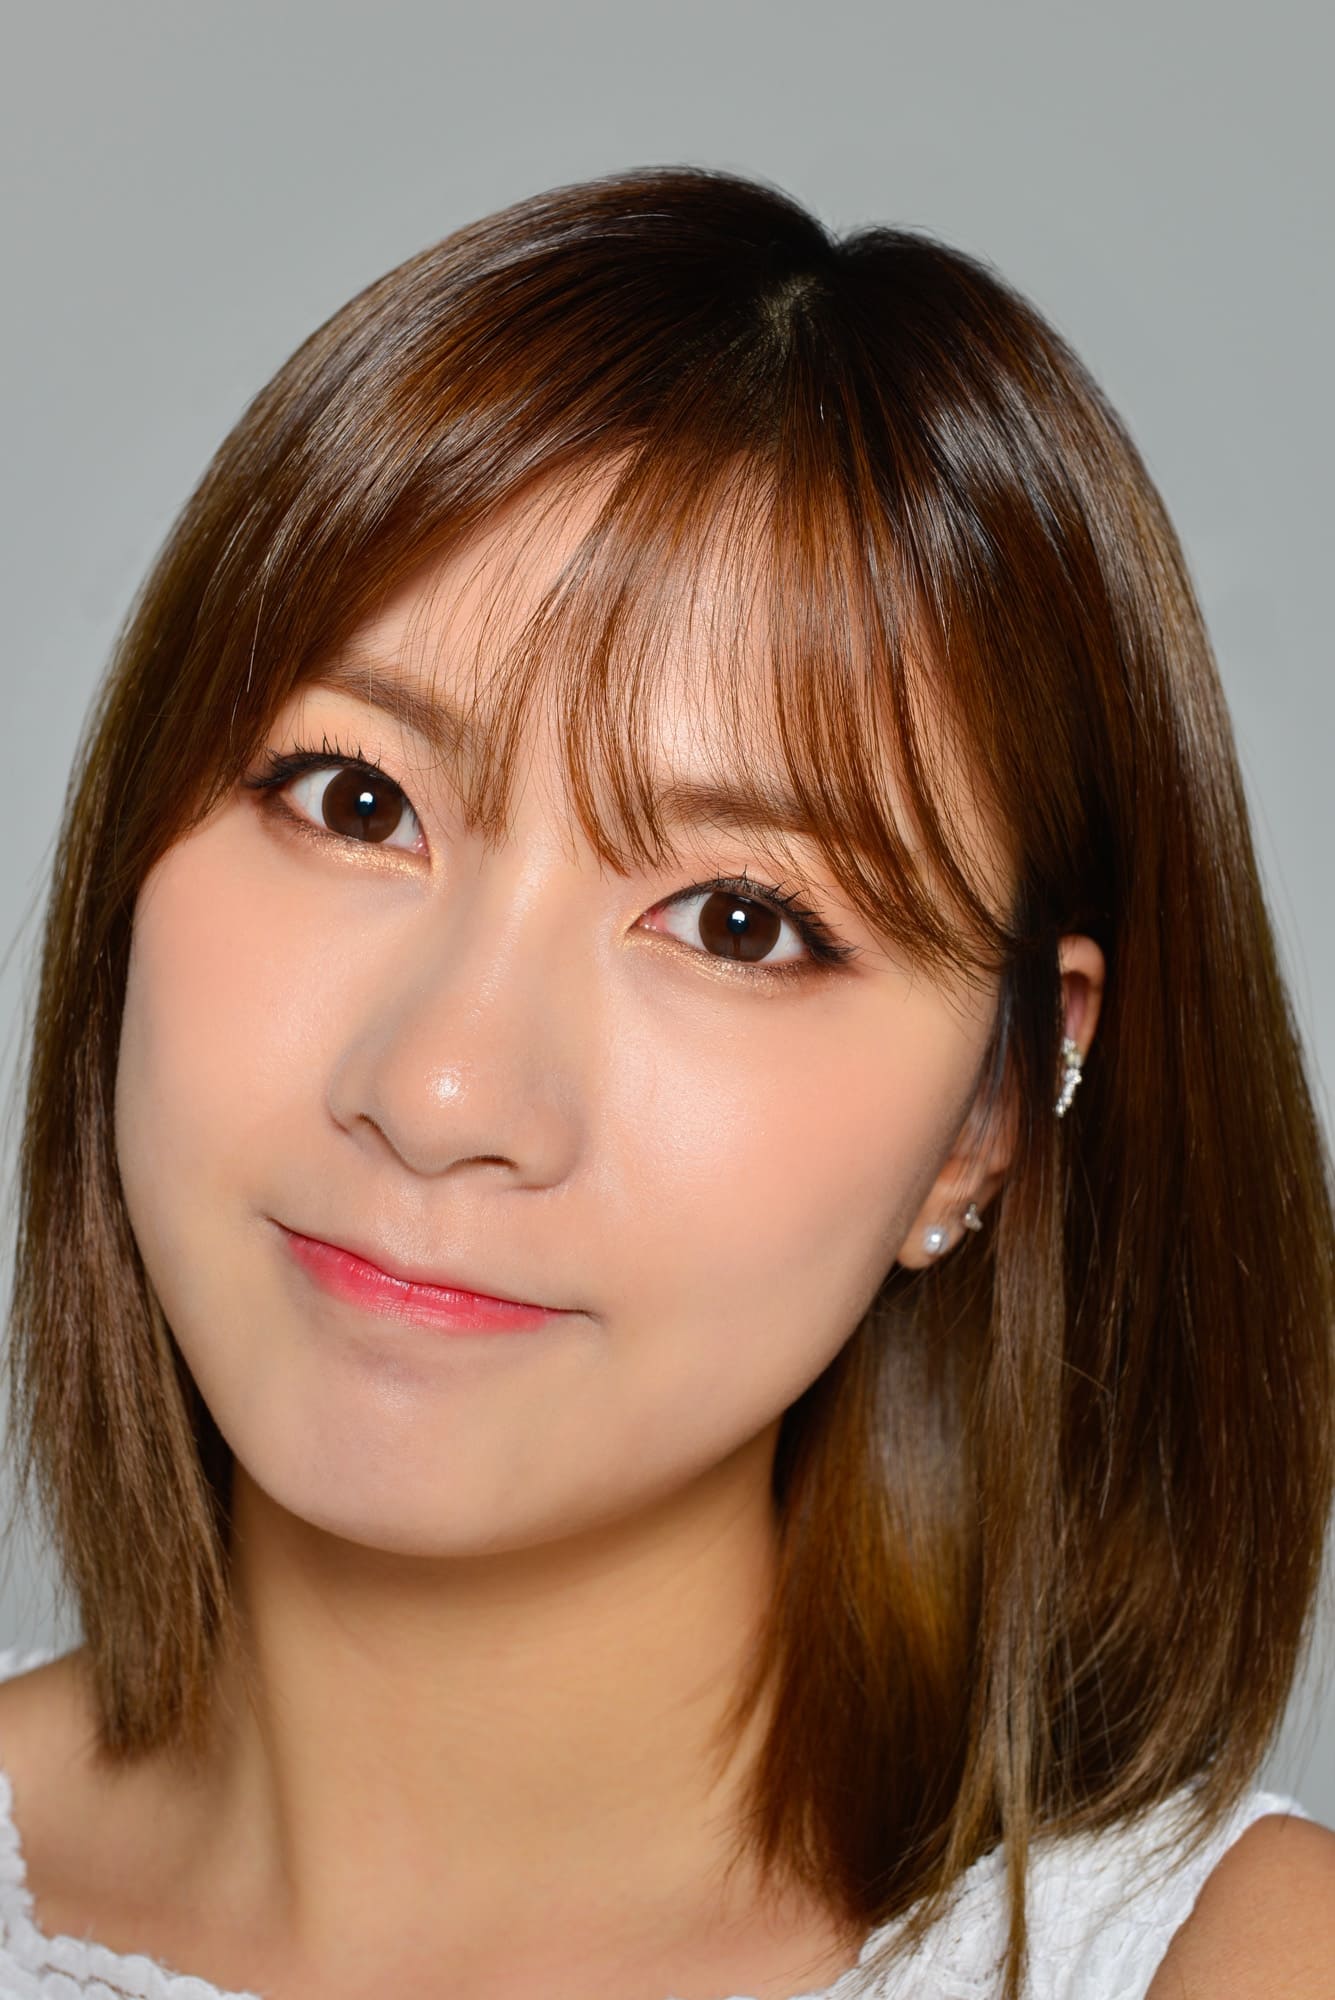 Oh Ha-young